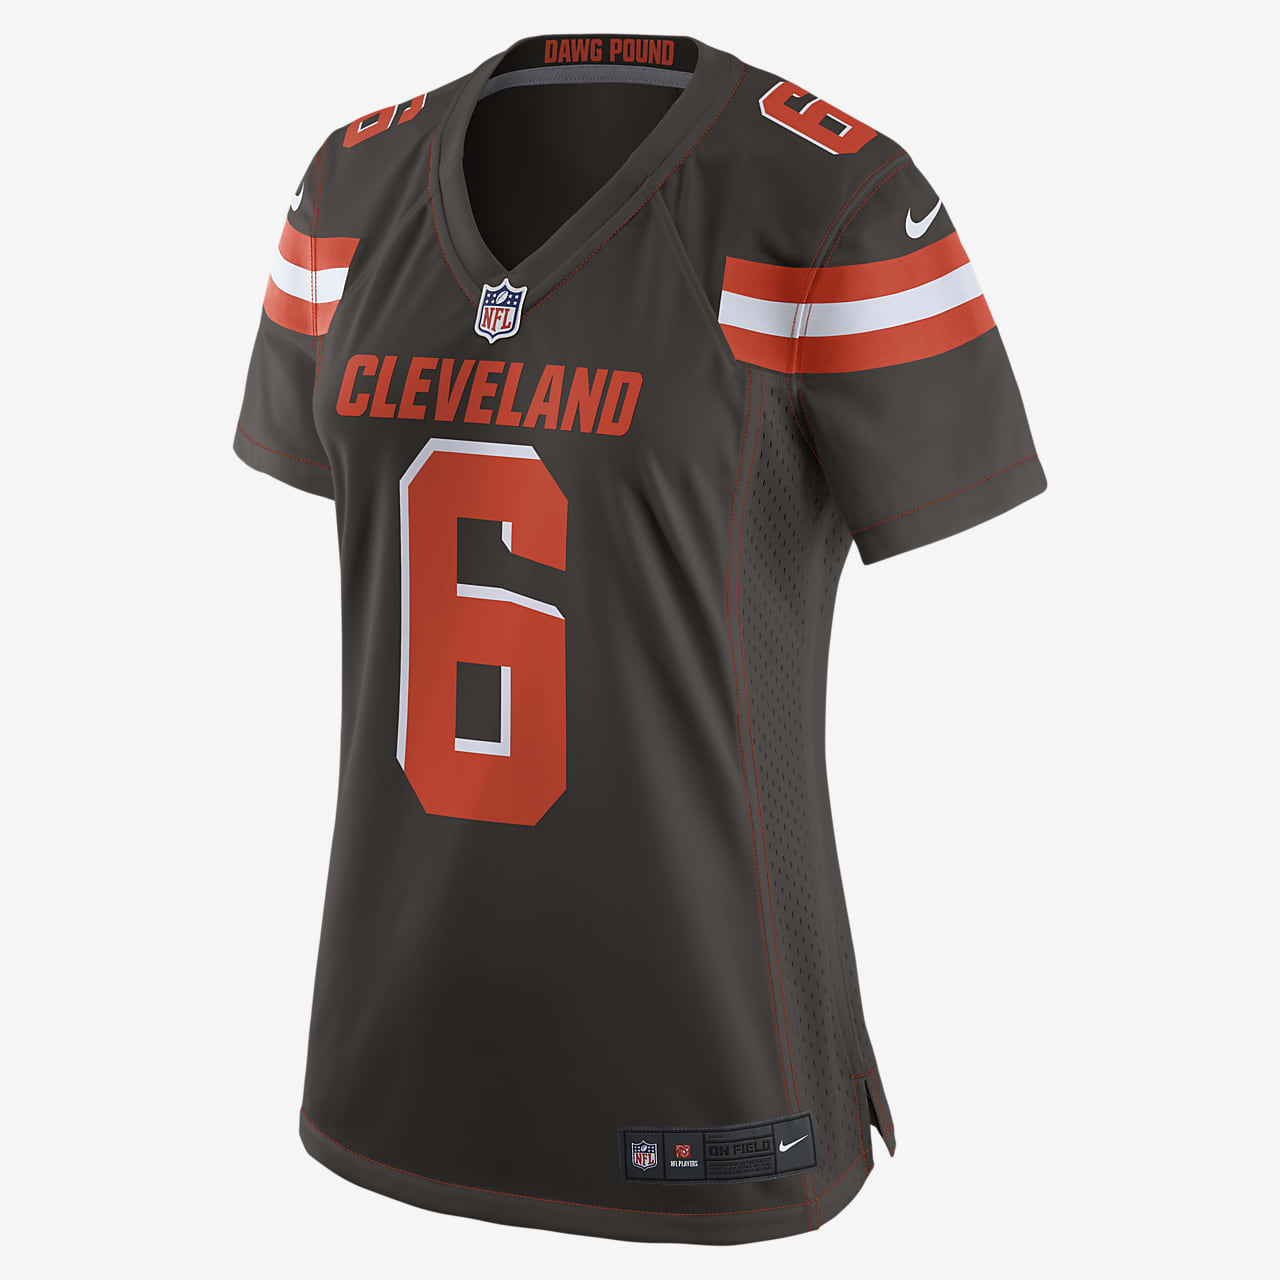 baker mayfield browns jersey white